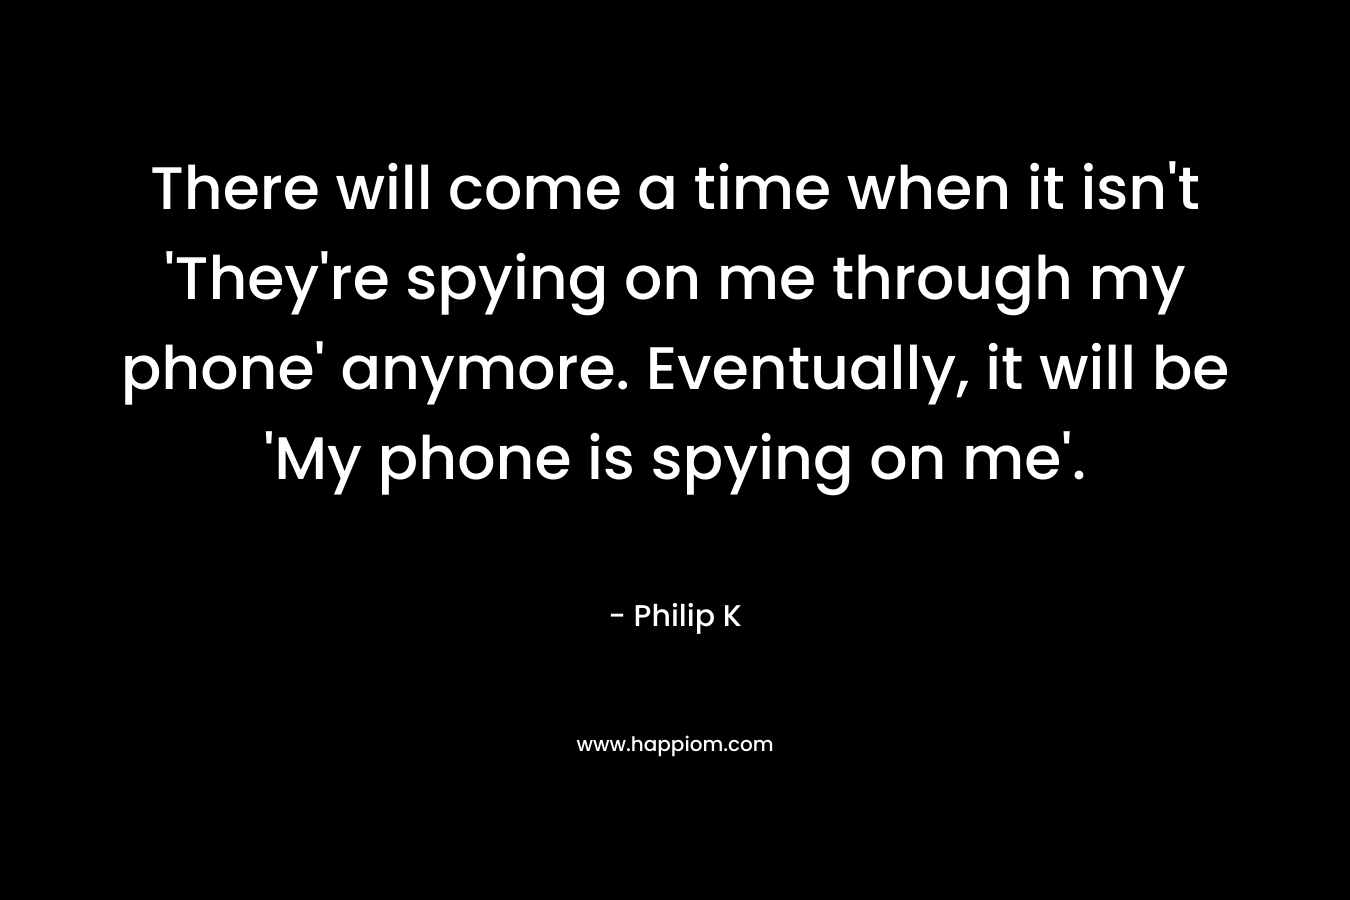 There will come a time when it isn't 'They're spying on me through my phone' anymore. Eventually, it will be 'My phone is spying on me'.